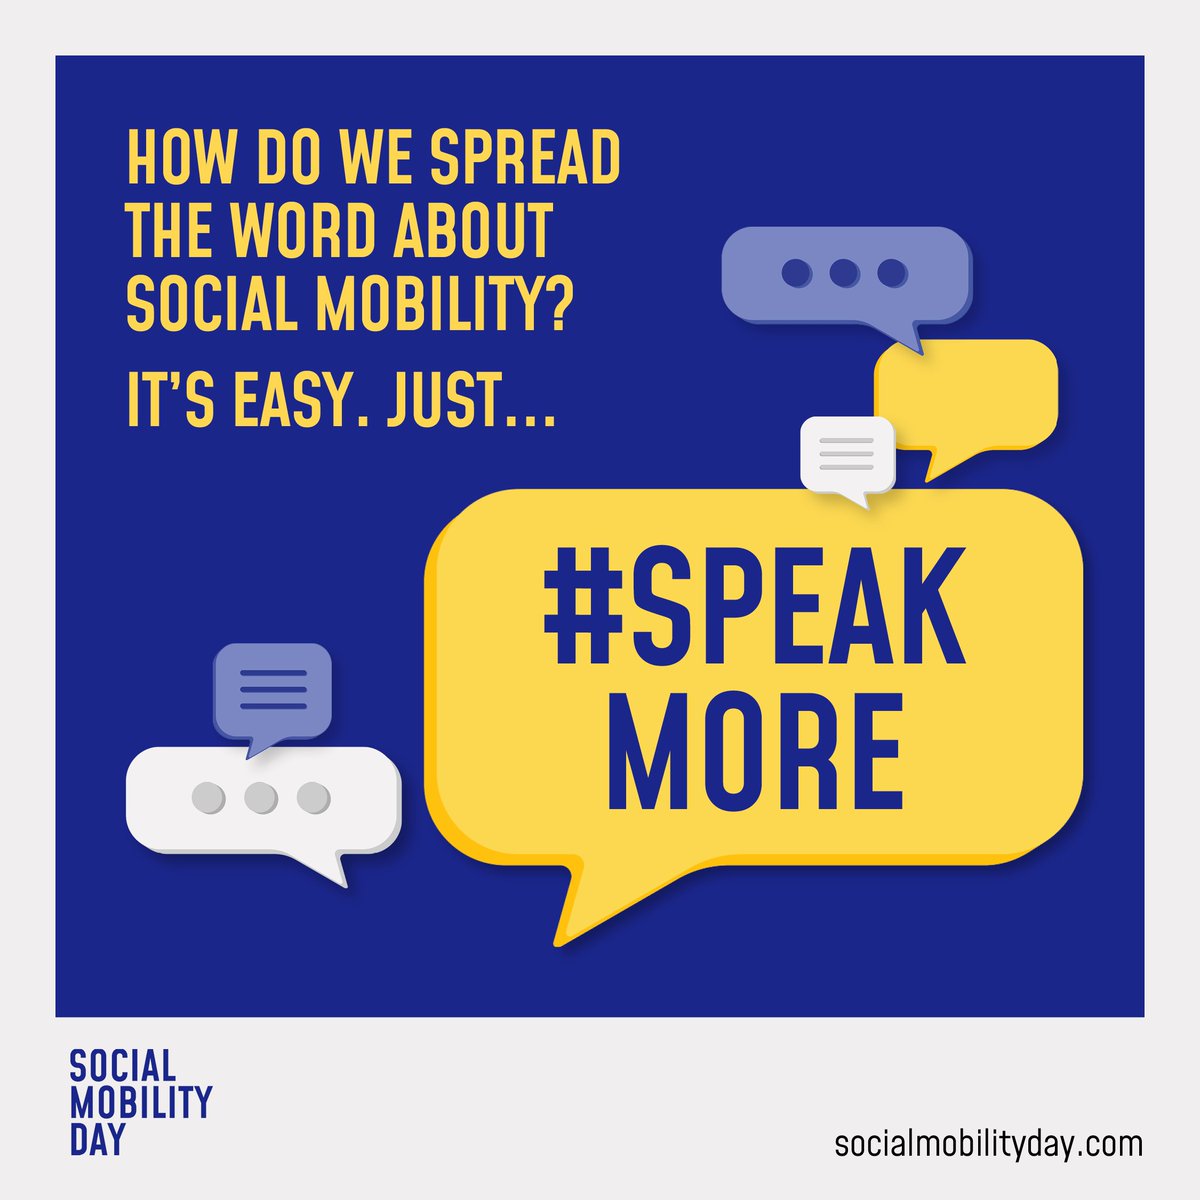 Today is #SocialMobilityDay and the theme is simple - to #SpeakMore. To share the work being done, to raise awareness and to drive more positive change. #SocialMobility is important to #employers in all industries - and I am proud to be playing my part in making a difference.